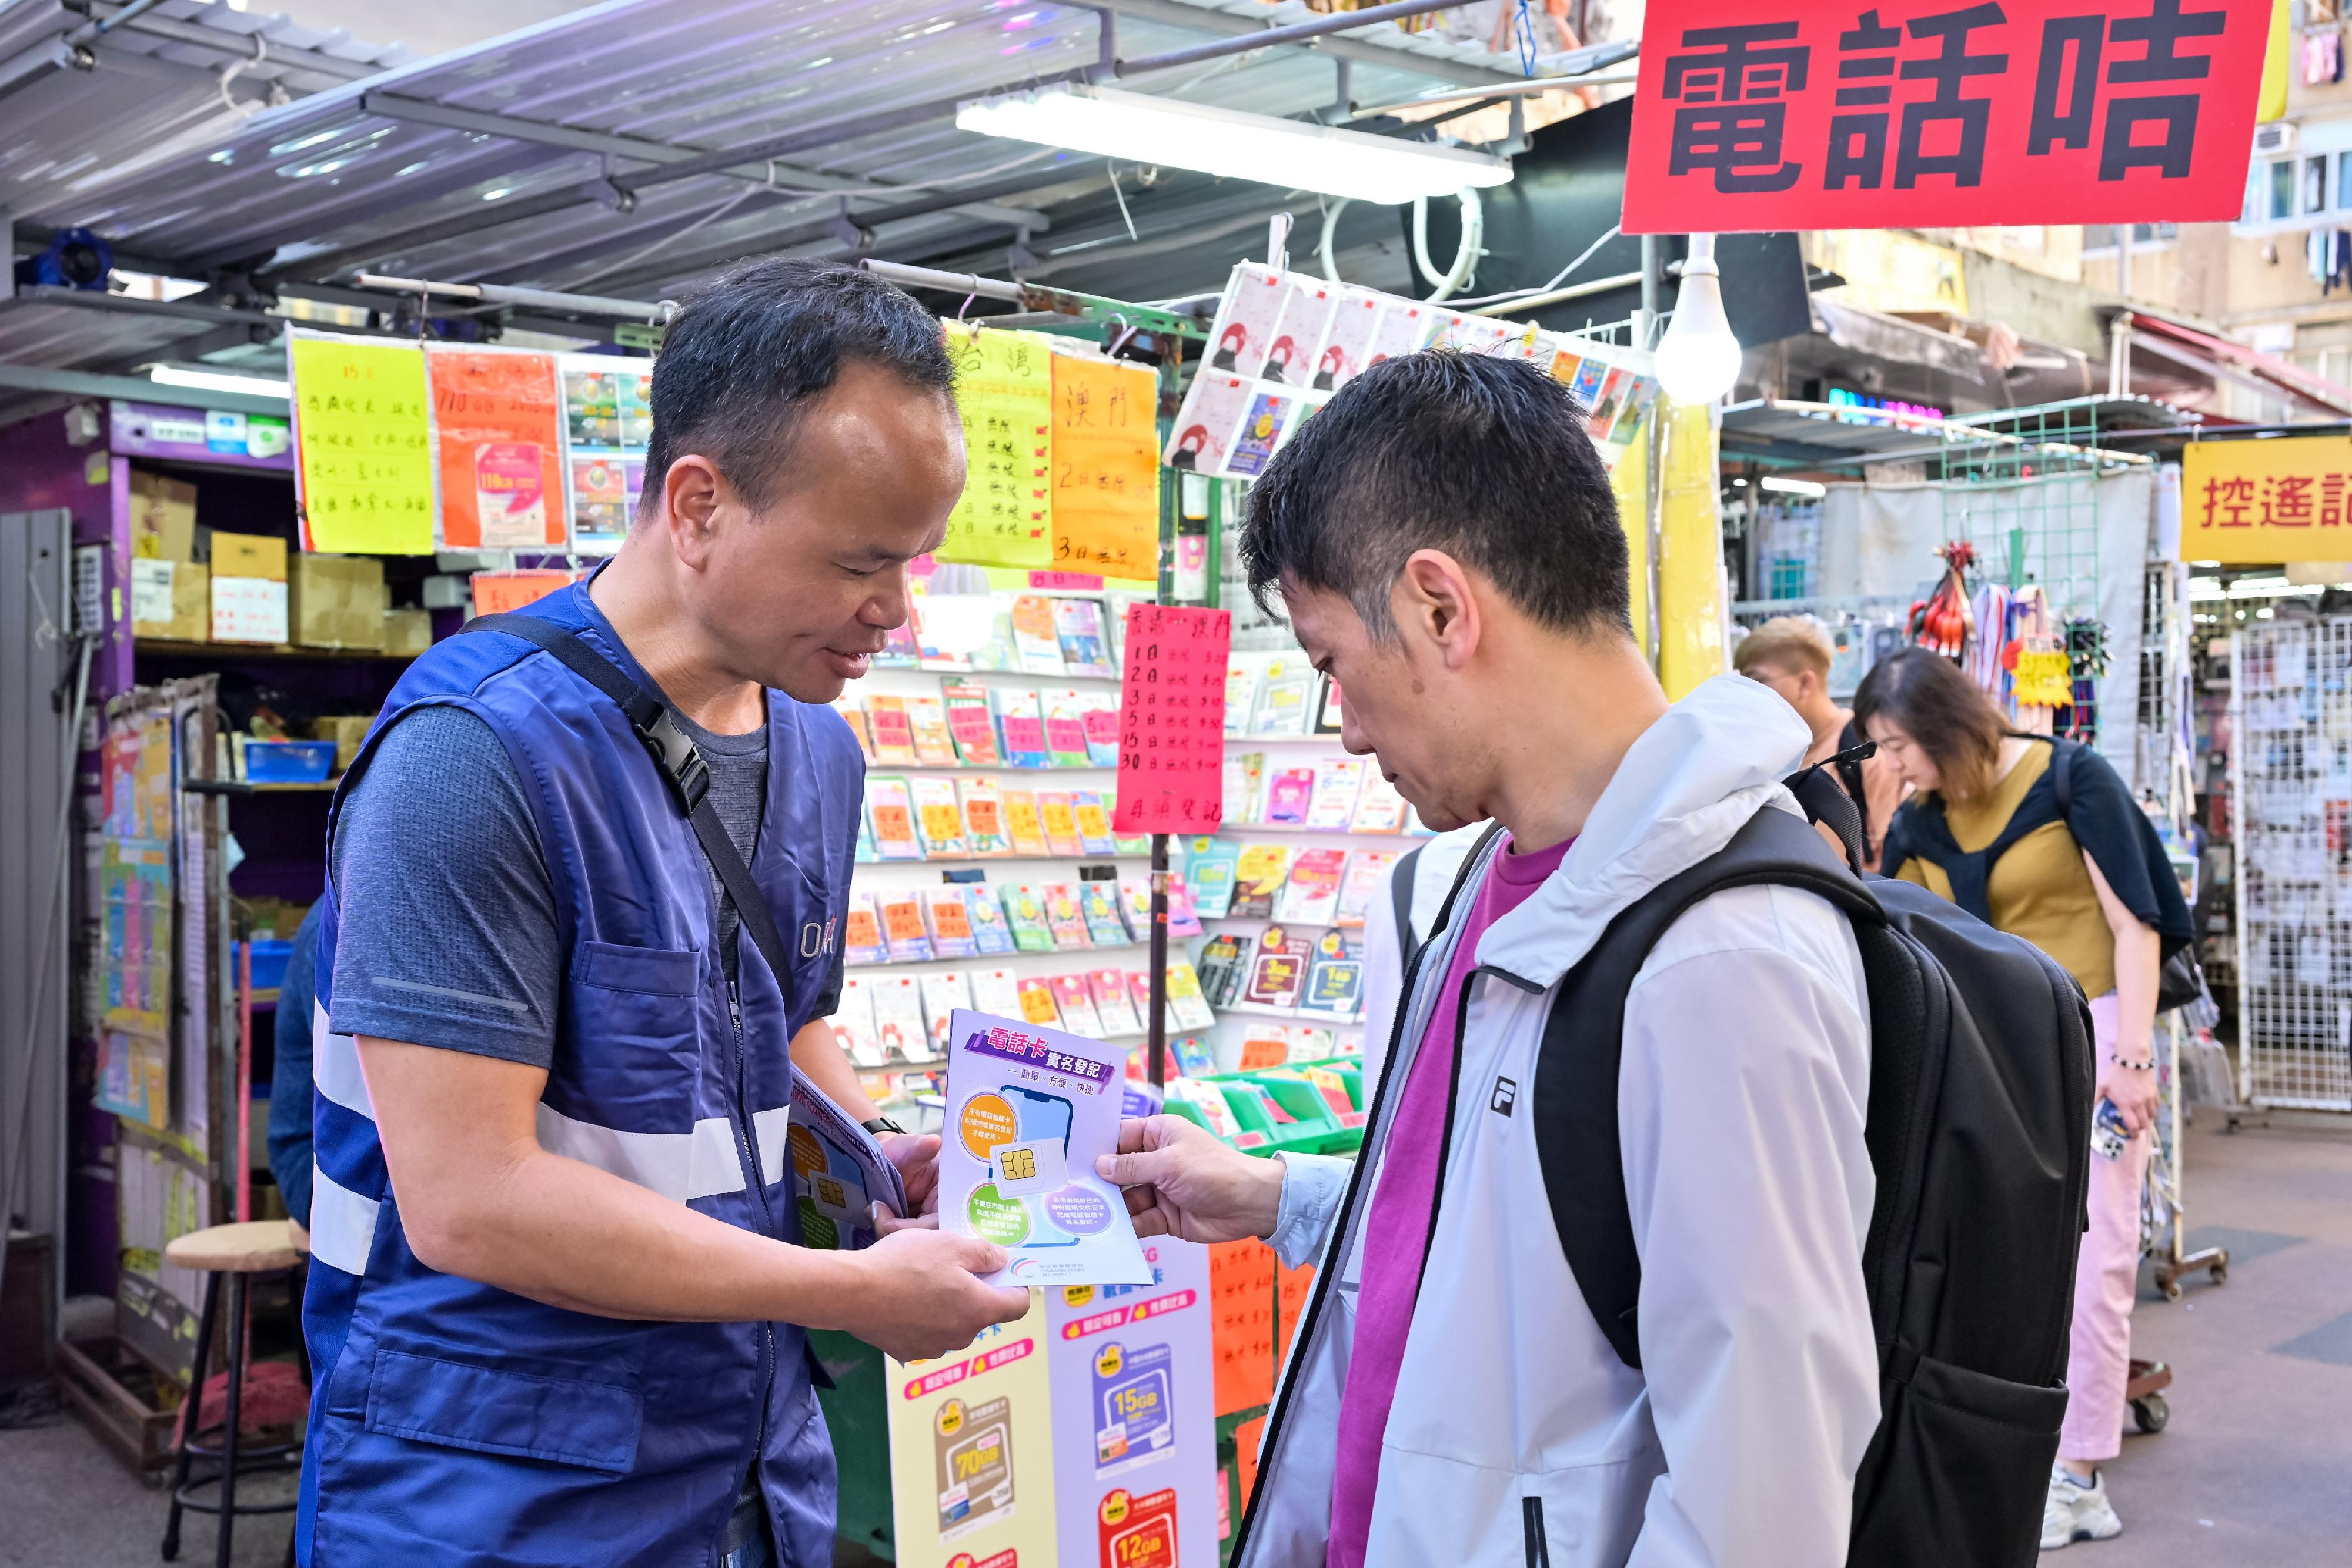 The Office of the Communications Authority conducted today (November 21) a new round of market surveillance and publicity and education activities around Apliu Street in Sham Shui Po on real-name registration for SIM cards, and distributed pamphlets to members of the public reminding them to complete registration using their own original identity document, and not to purchase or resell registered pre-paid SIM cards.